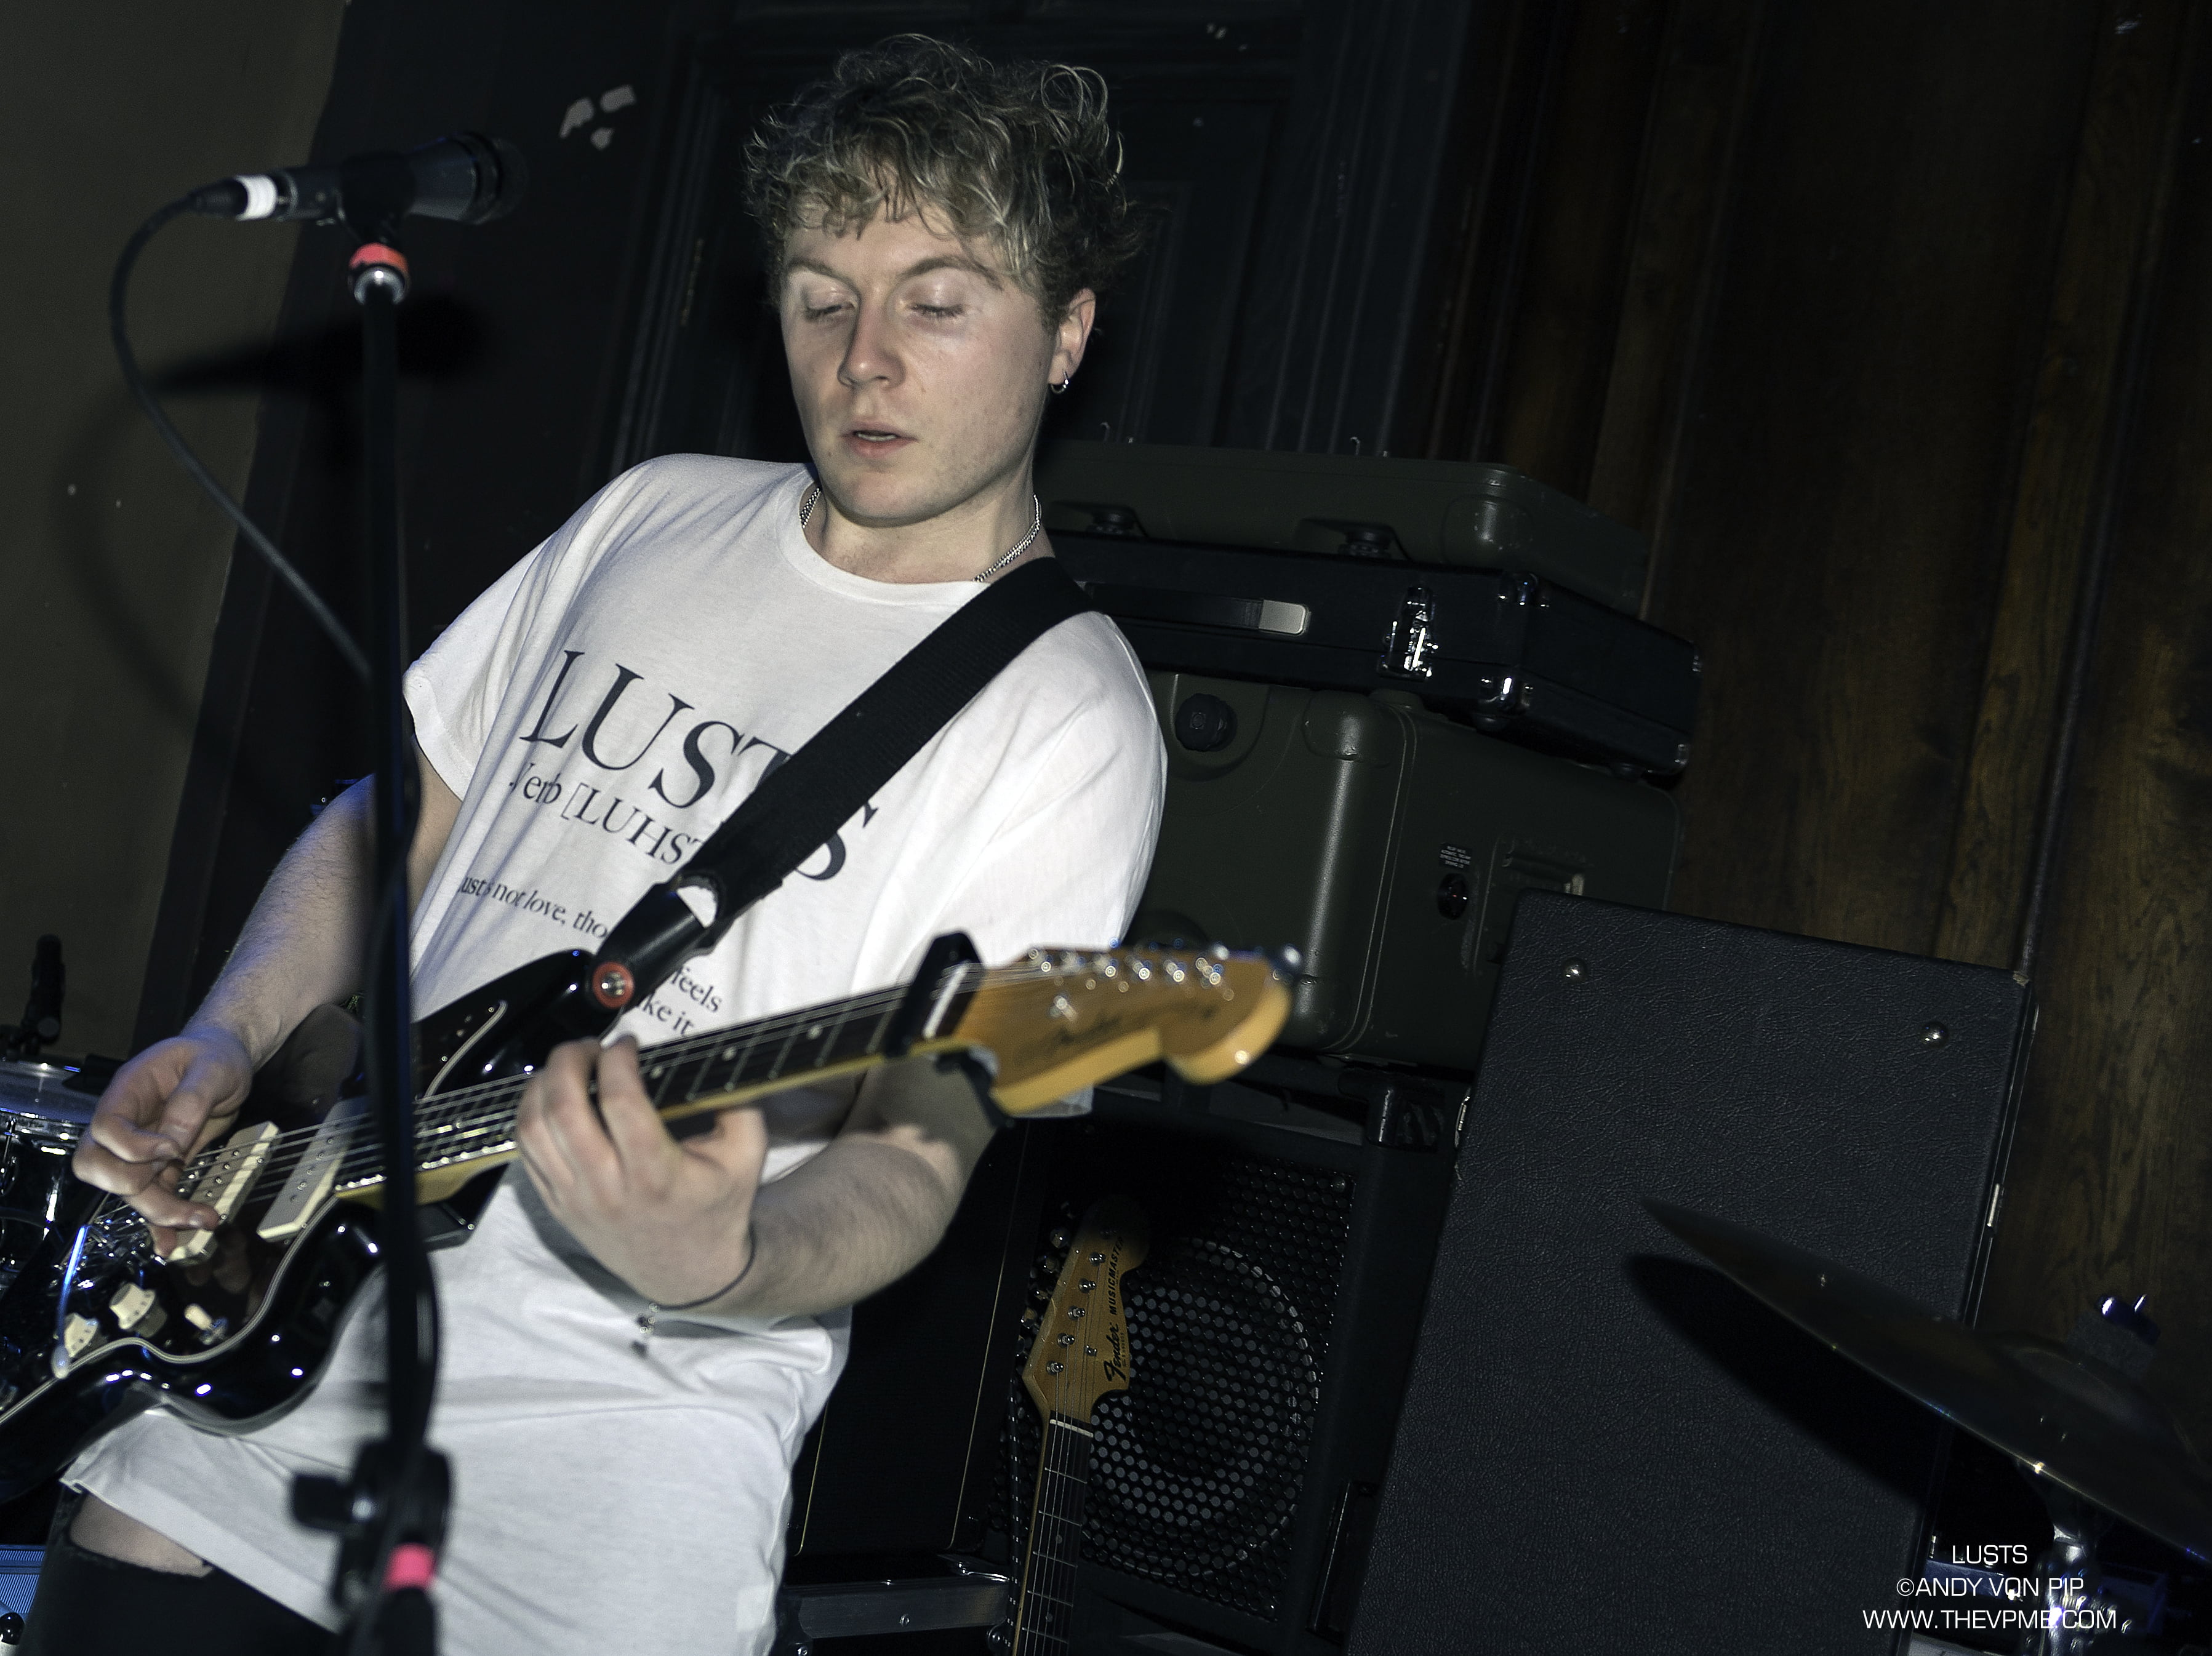 LUSTS - Manchester 9 March 2015